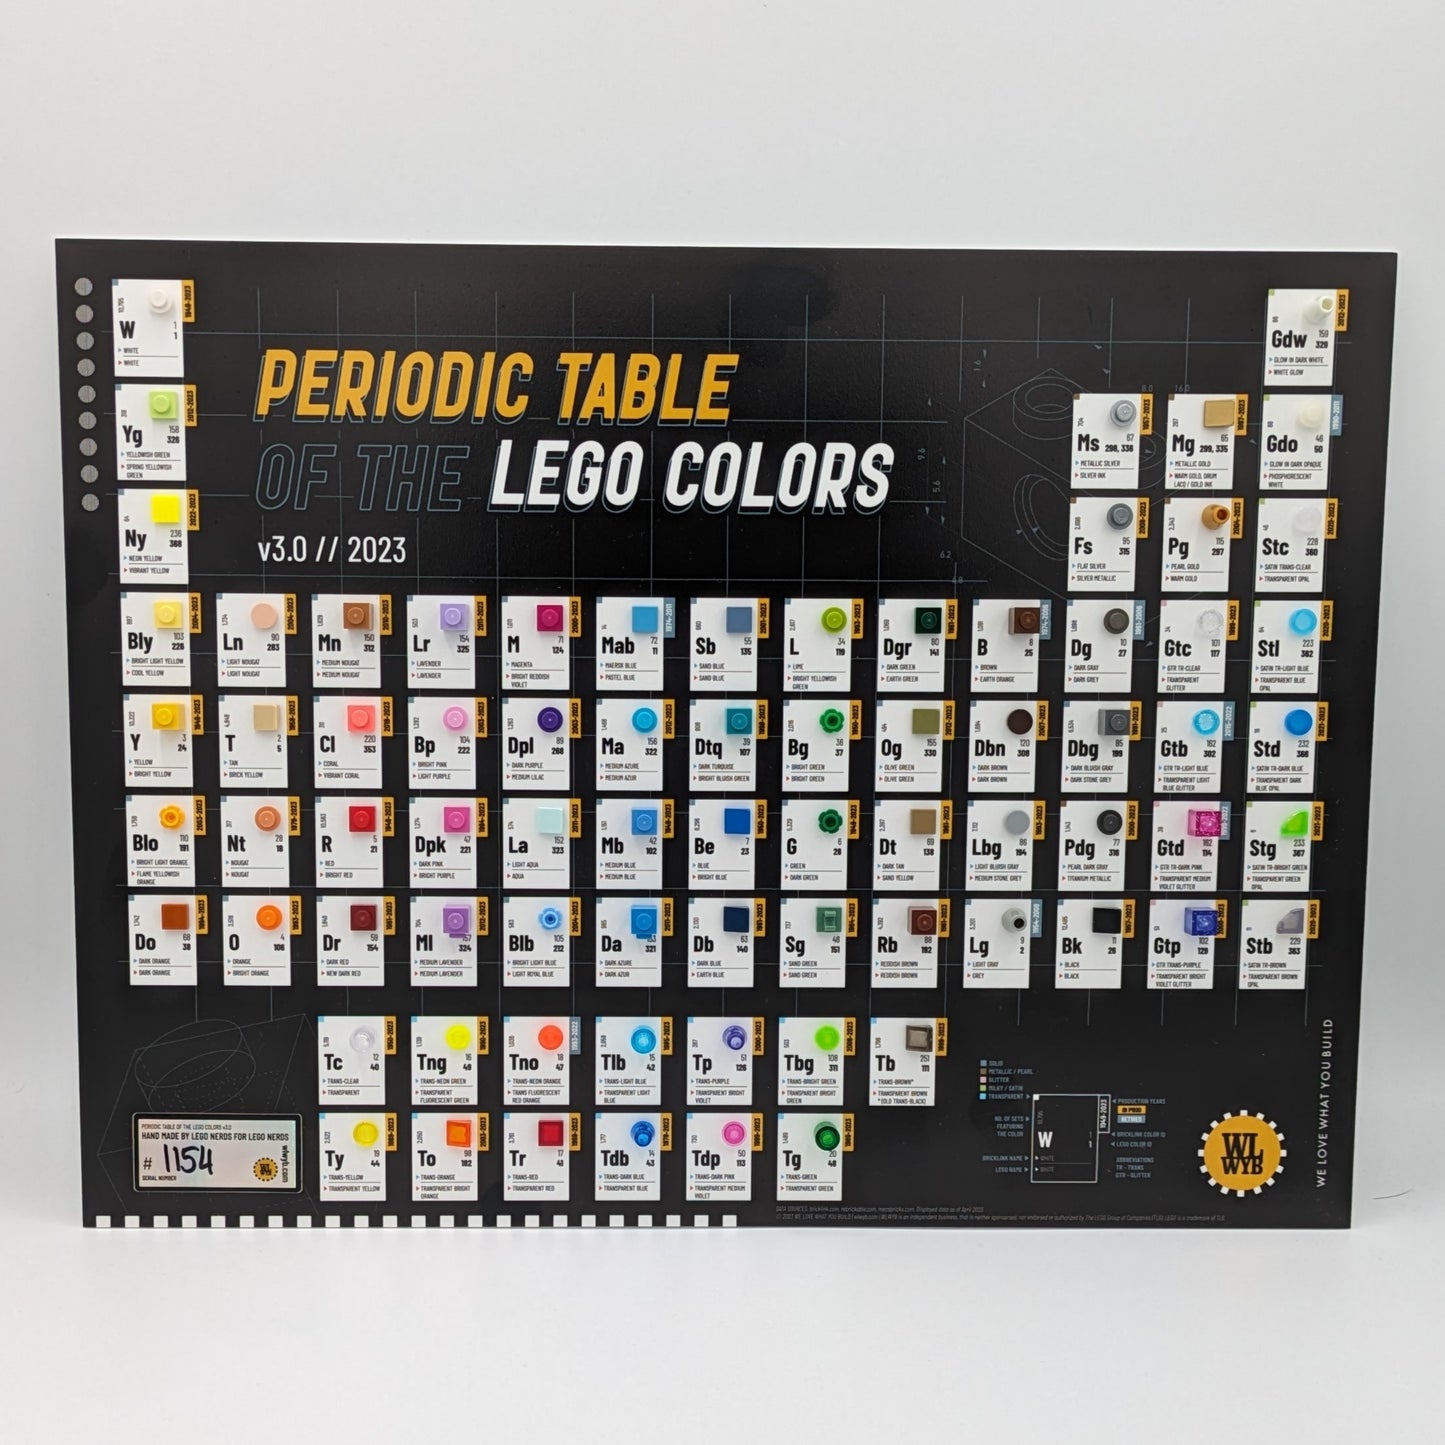 Periodic Table of LEGO Colors